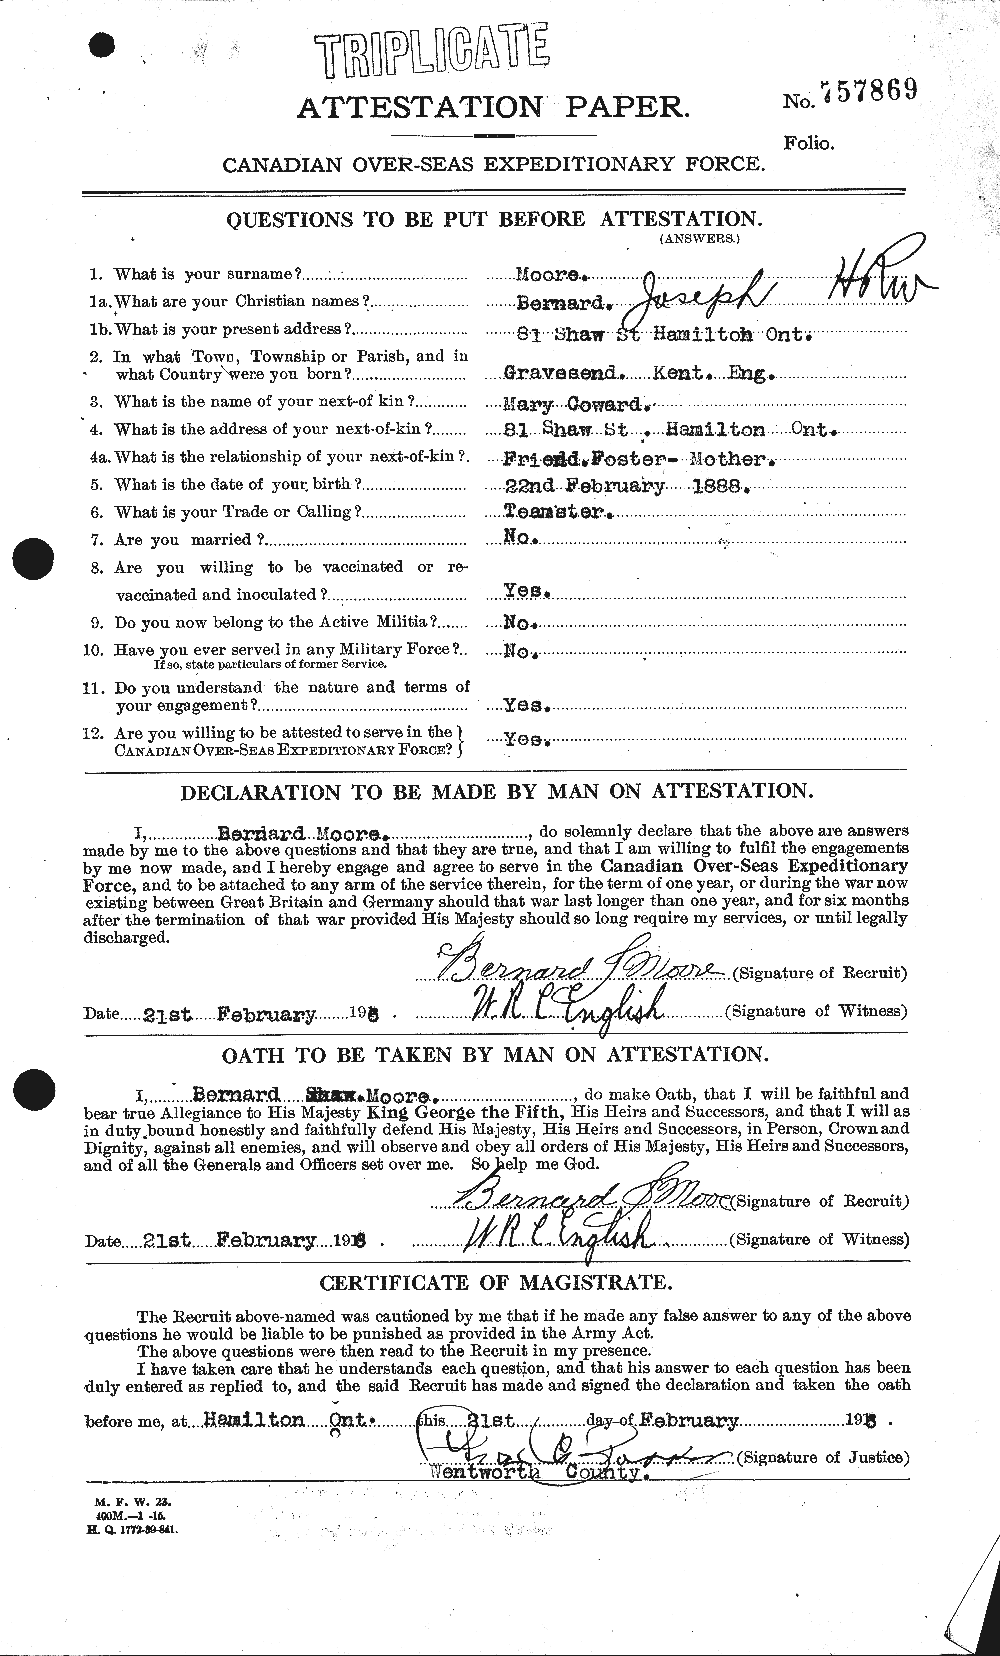 Personnel Records of the First World War - CEF 506463a